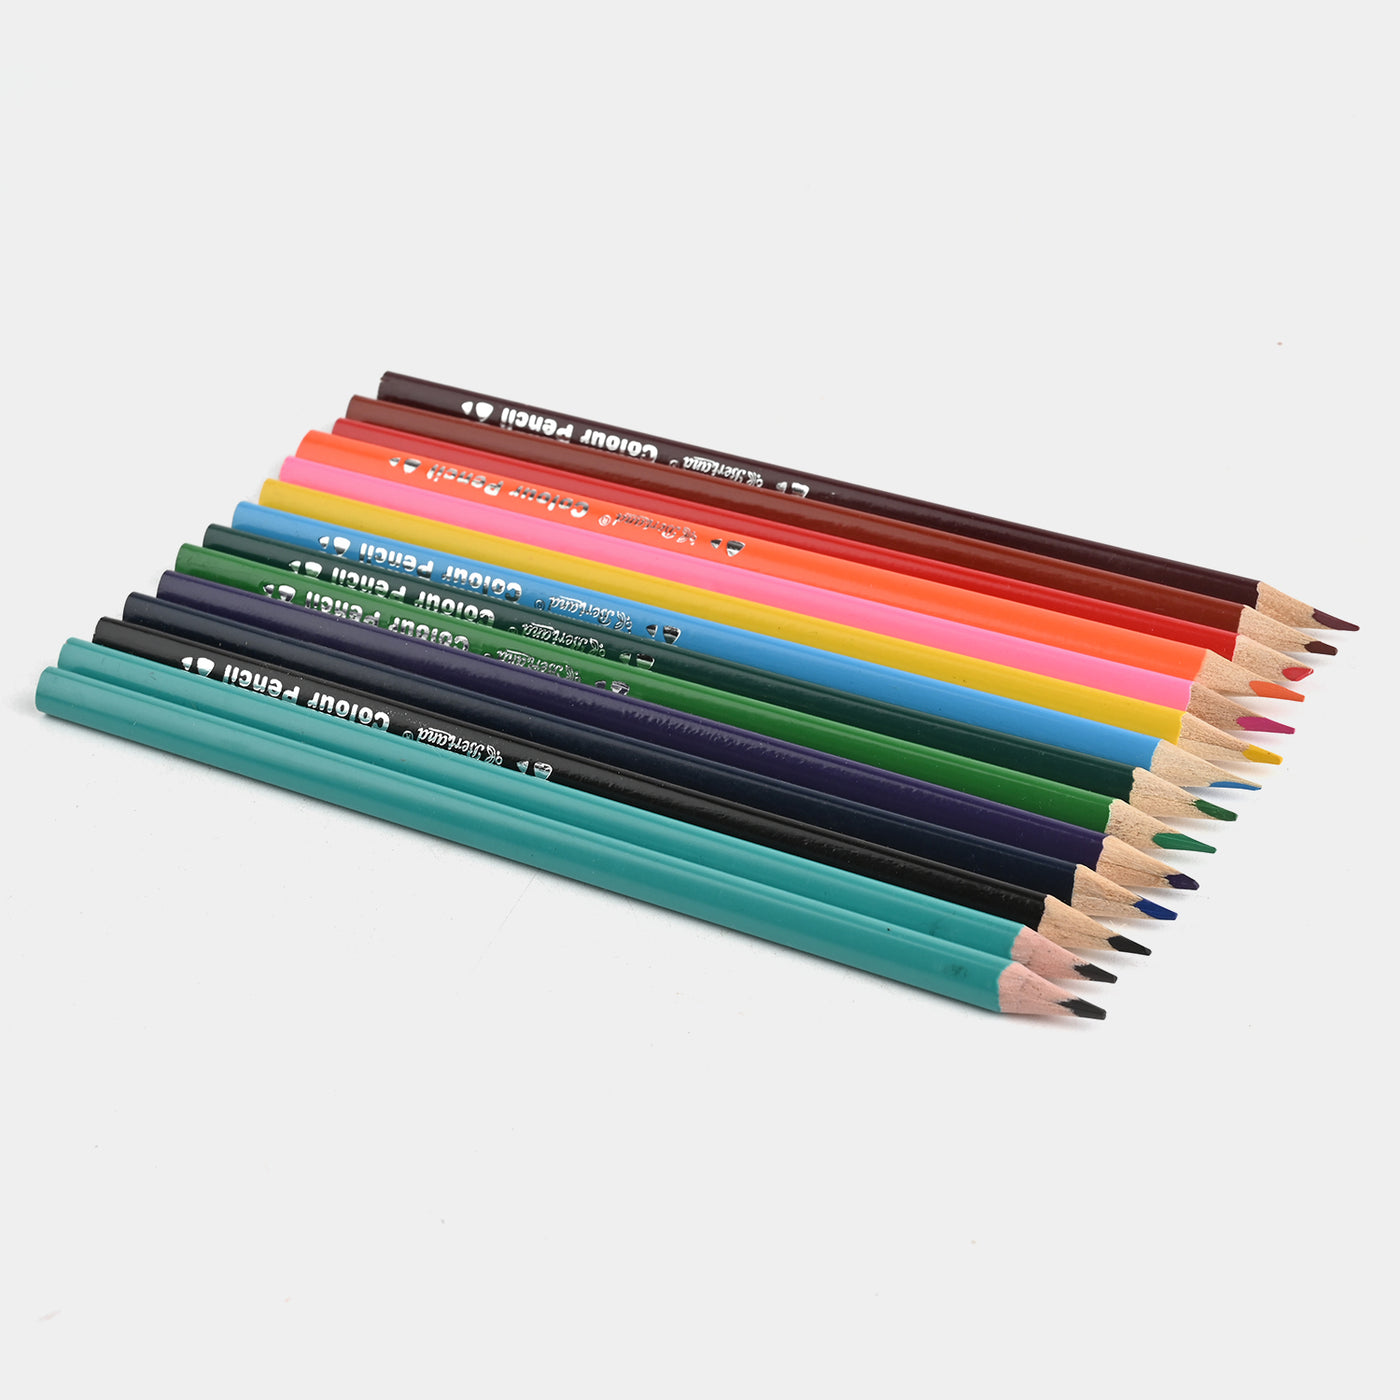 BERTAND COLORED PENCILS FOR KIDS |12 COLORS